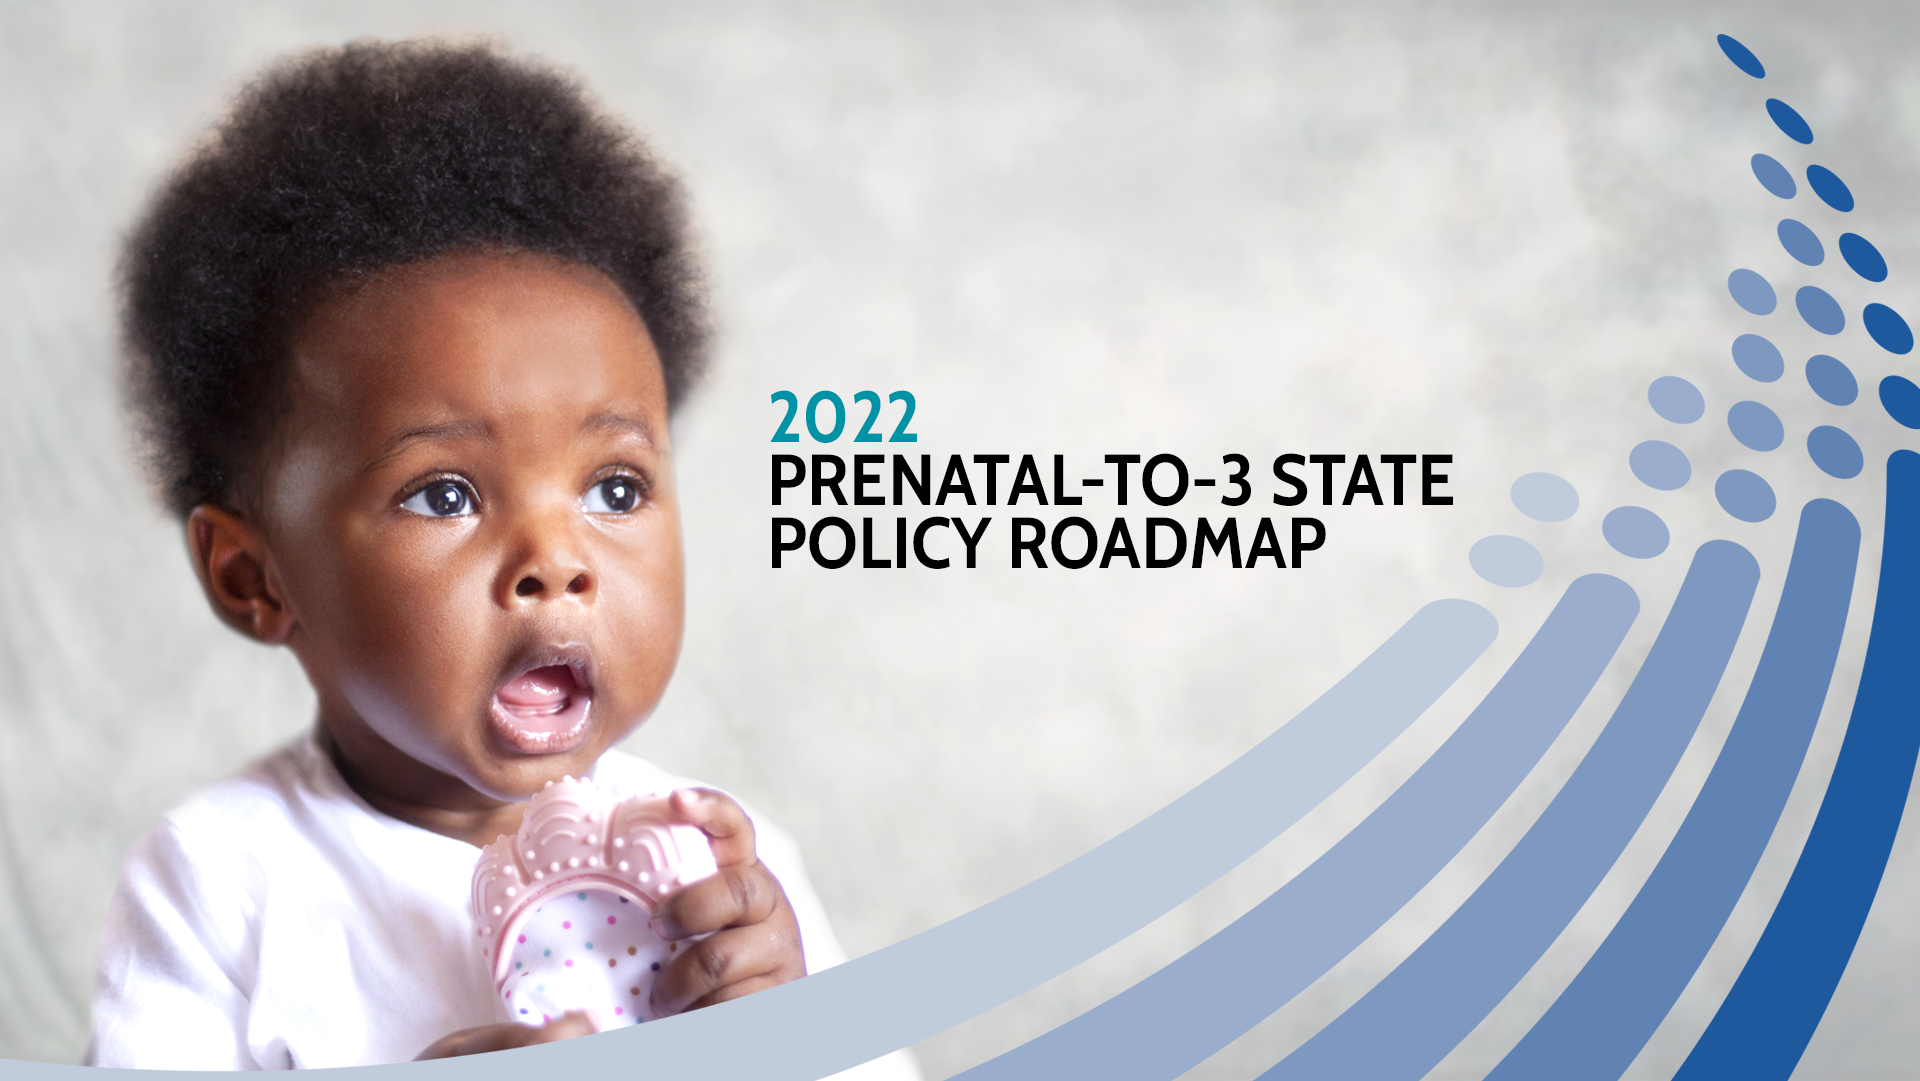 Prenatal-to-3 State Policy Roadmap